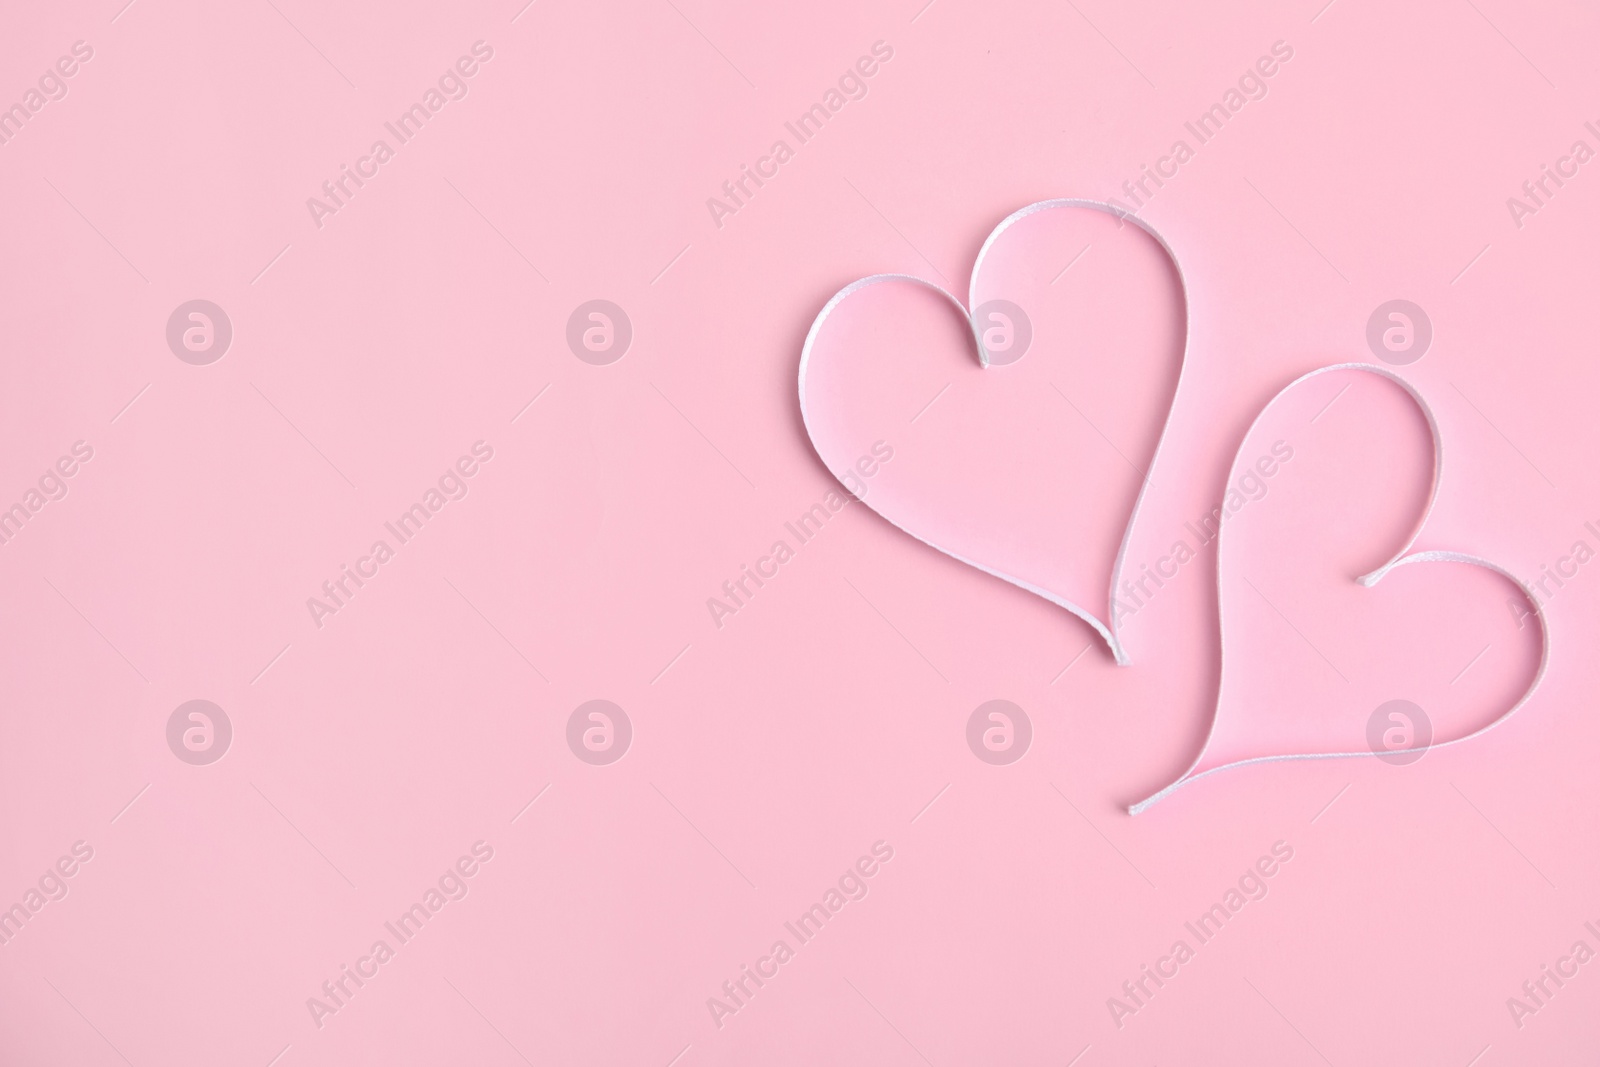 Photo of Hearts made of white ribbon on pink background, flat lay with space for text. Valentine's day celebration